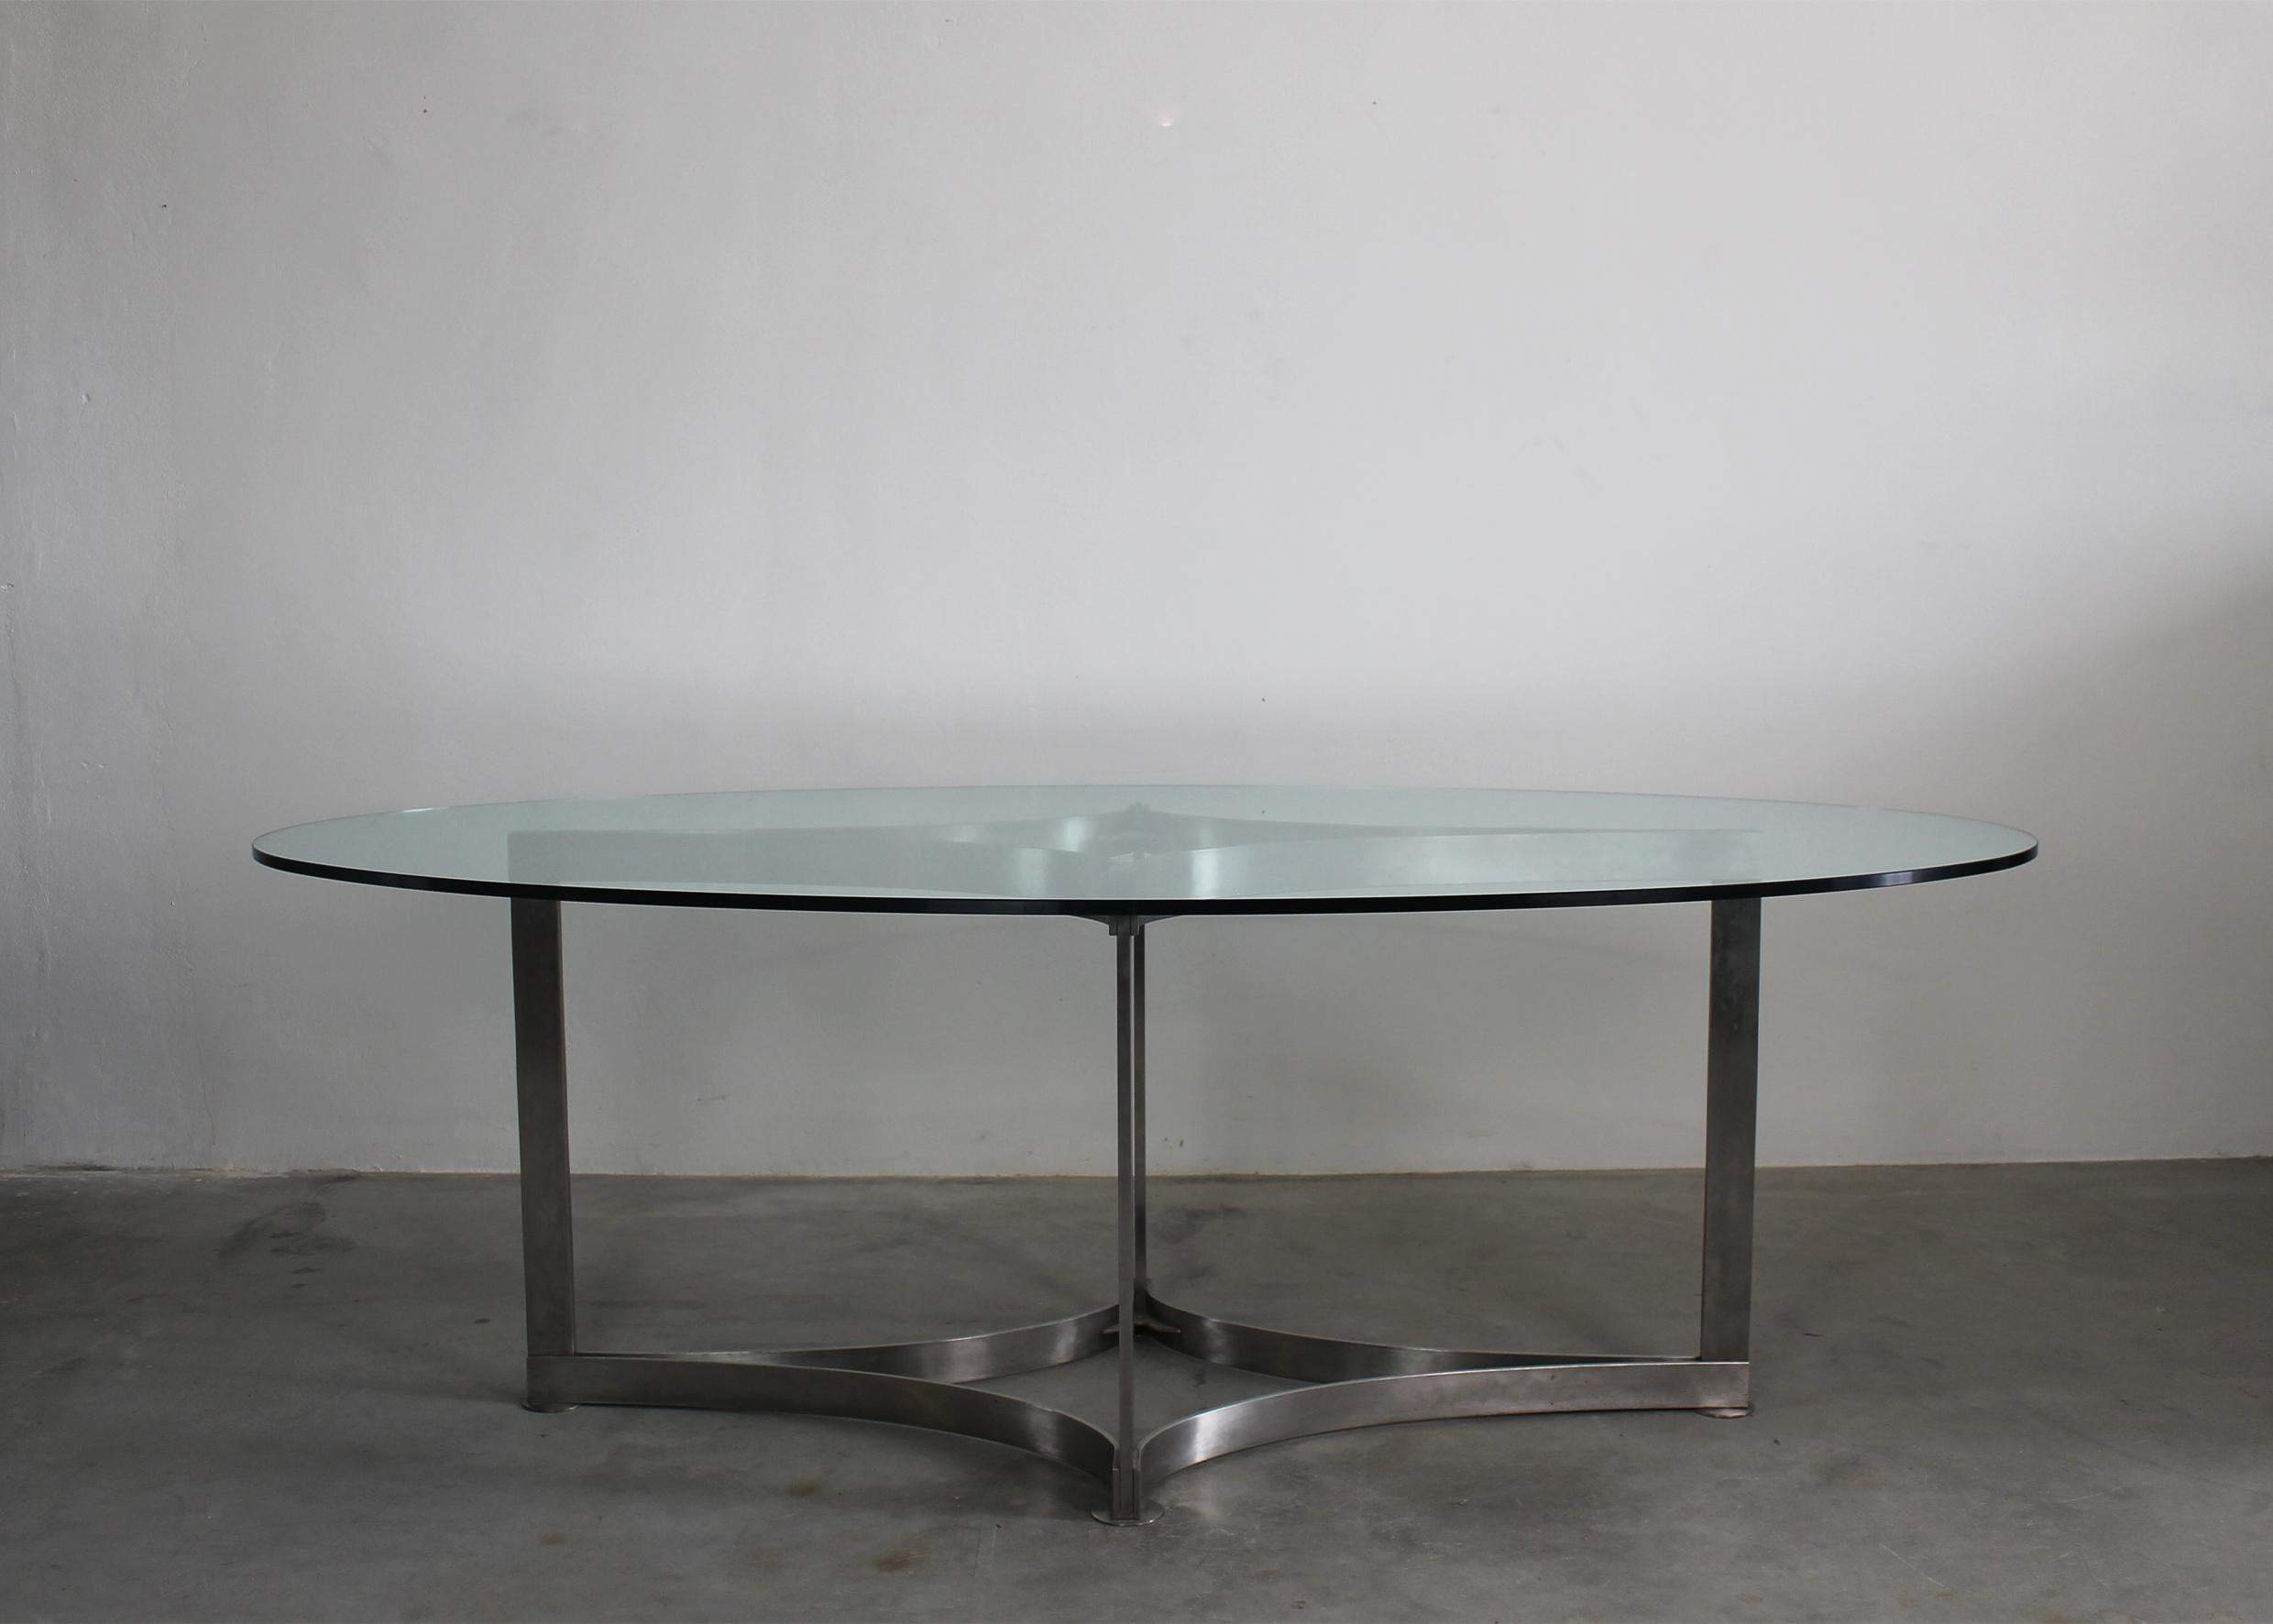 Vittorio Introini Oval Shaped Dining Table in Steel ang Glass by Saporiti 1970s For Sale